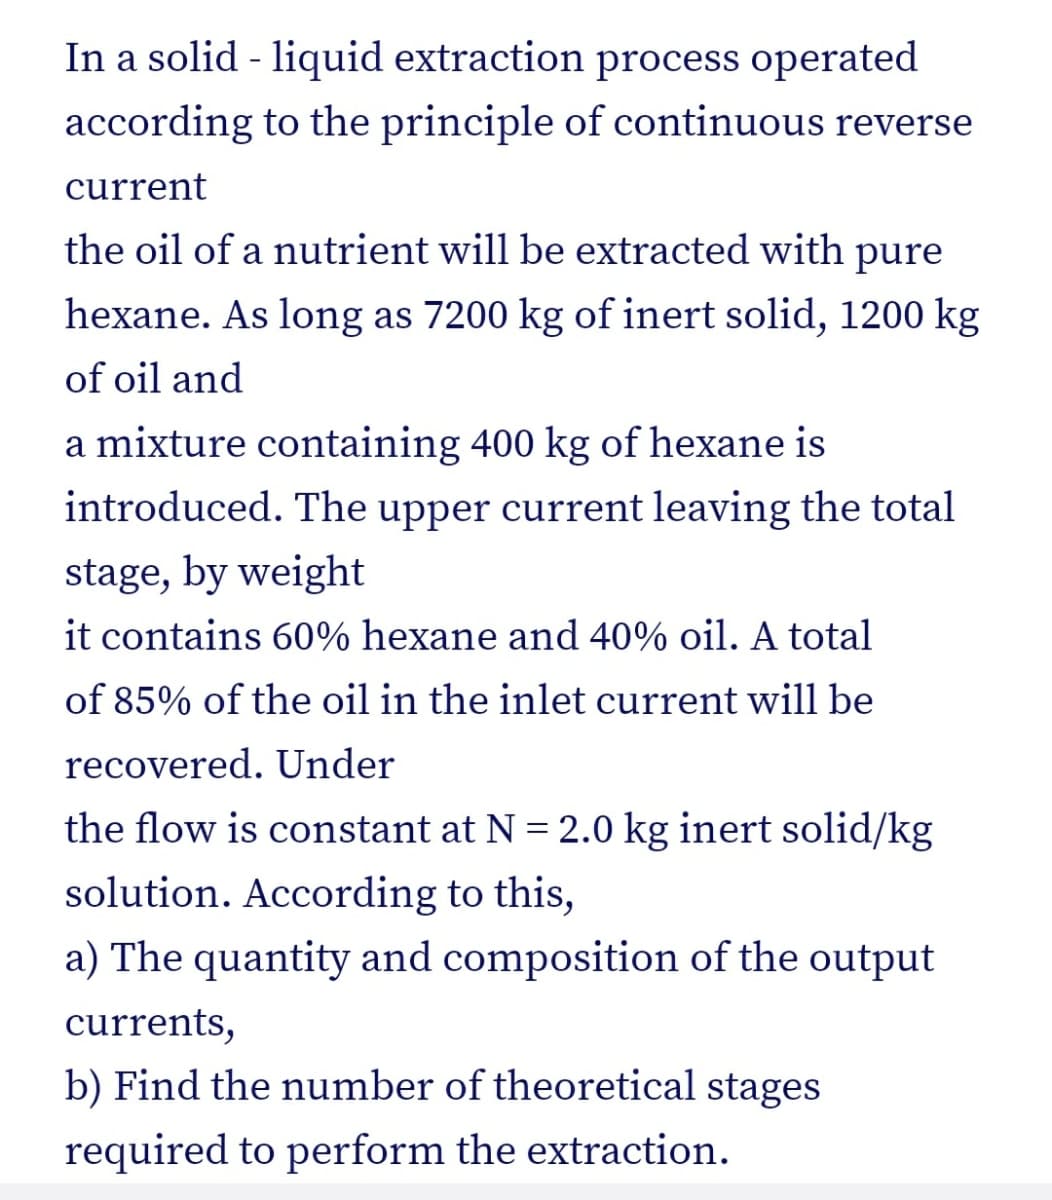 In a solid - liquid extraction process operated
according to the principle of continuous reverse
current
the oil of a nutrient will be extracted with pure
hexane. As long as 7200 kg of inert solid, 1200 kg
of oil and
a mixture containing 400 kg of hexane is
introduced. The upper current leaving the total
stage, by weight
it contains 60% hexane and 40% oil. A total
of 85% of the oil in the inlet current will be
recovered. Under
the flow is constant at N = 2.0 kg inert solid/kg
solution. According to this,
a) The quantity and composition of the output
currents,
b) Find the number of theoretical stages
required to perform the extraction.